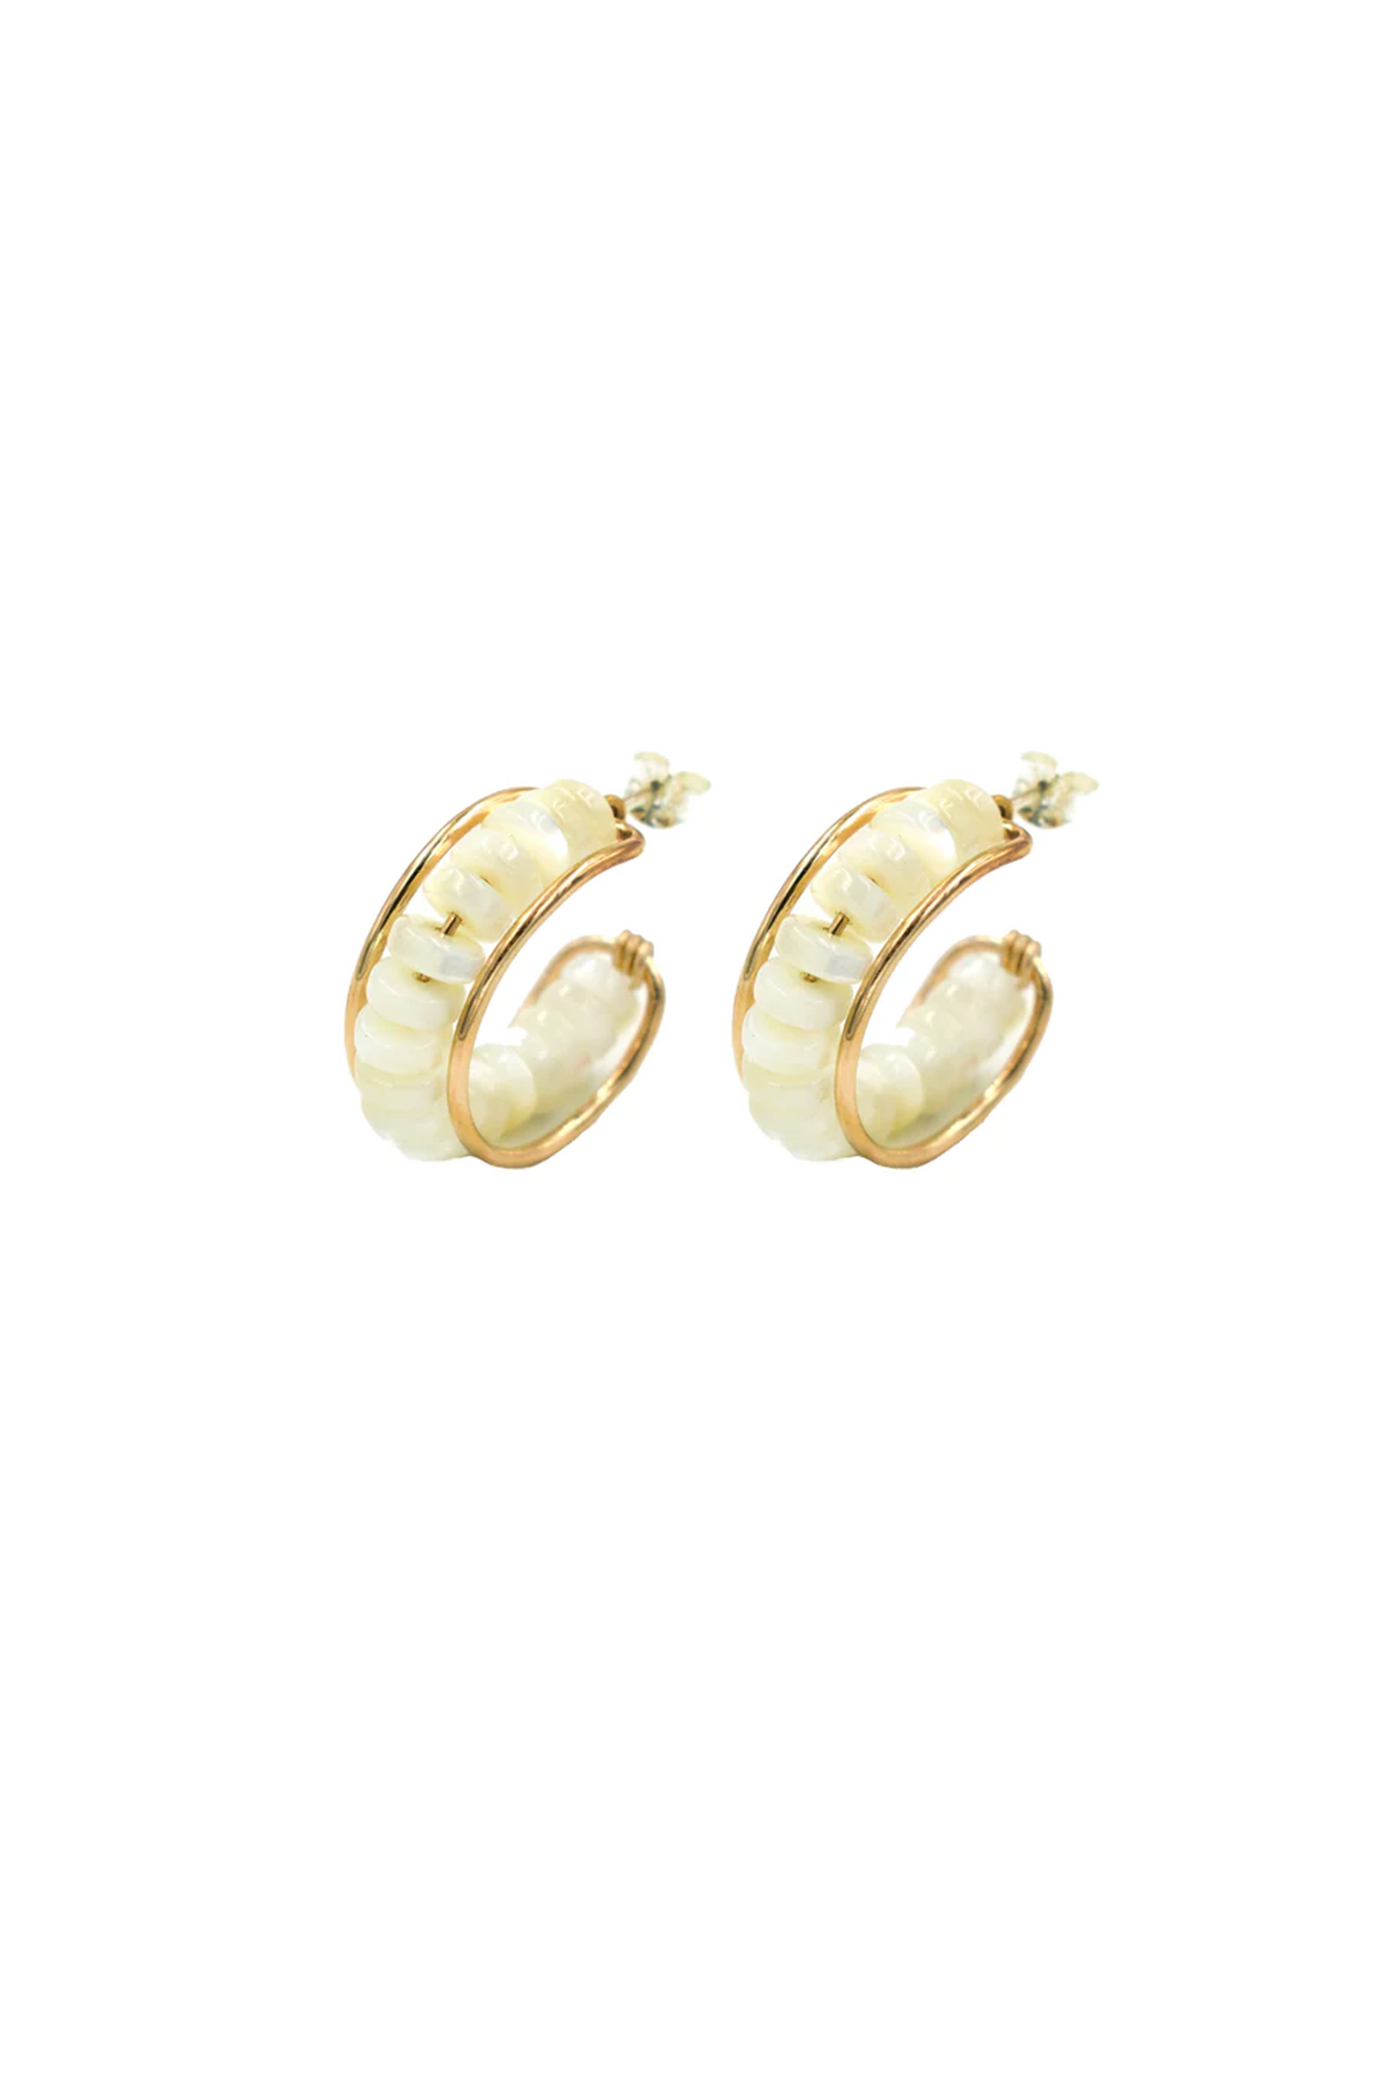 Paradigm Designs: Channel Hoop Earrings with Gold Filled detail and Pearl Beads